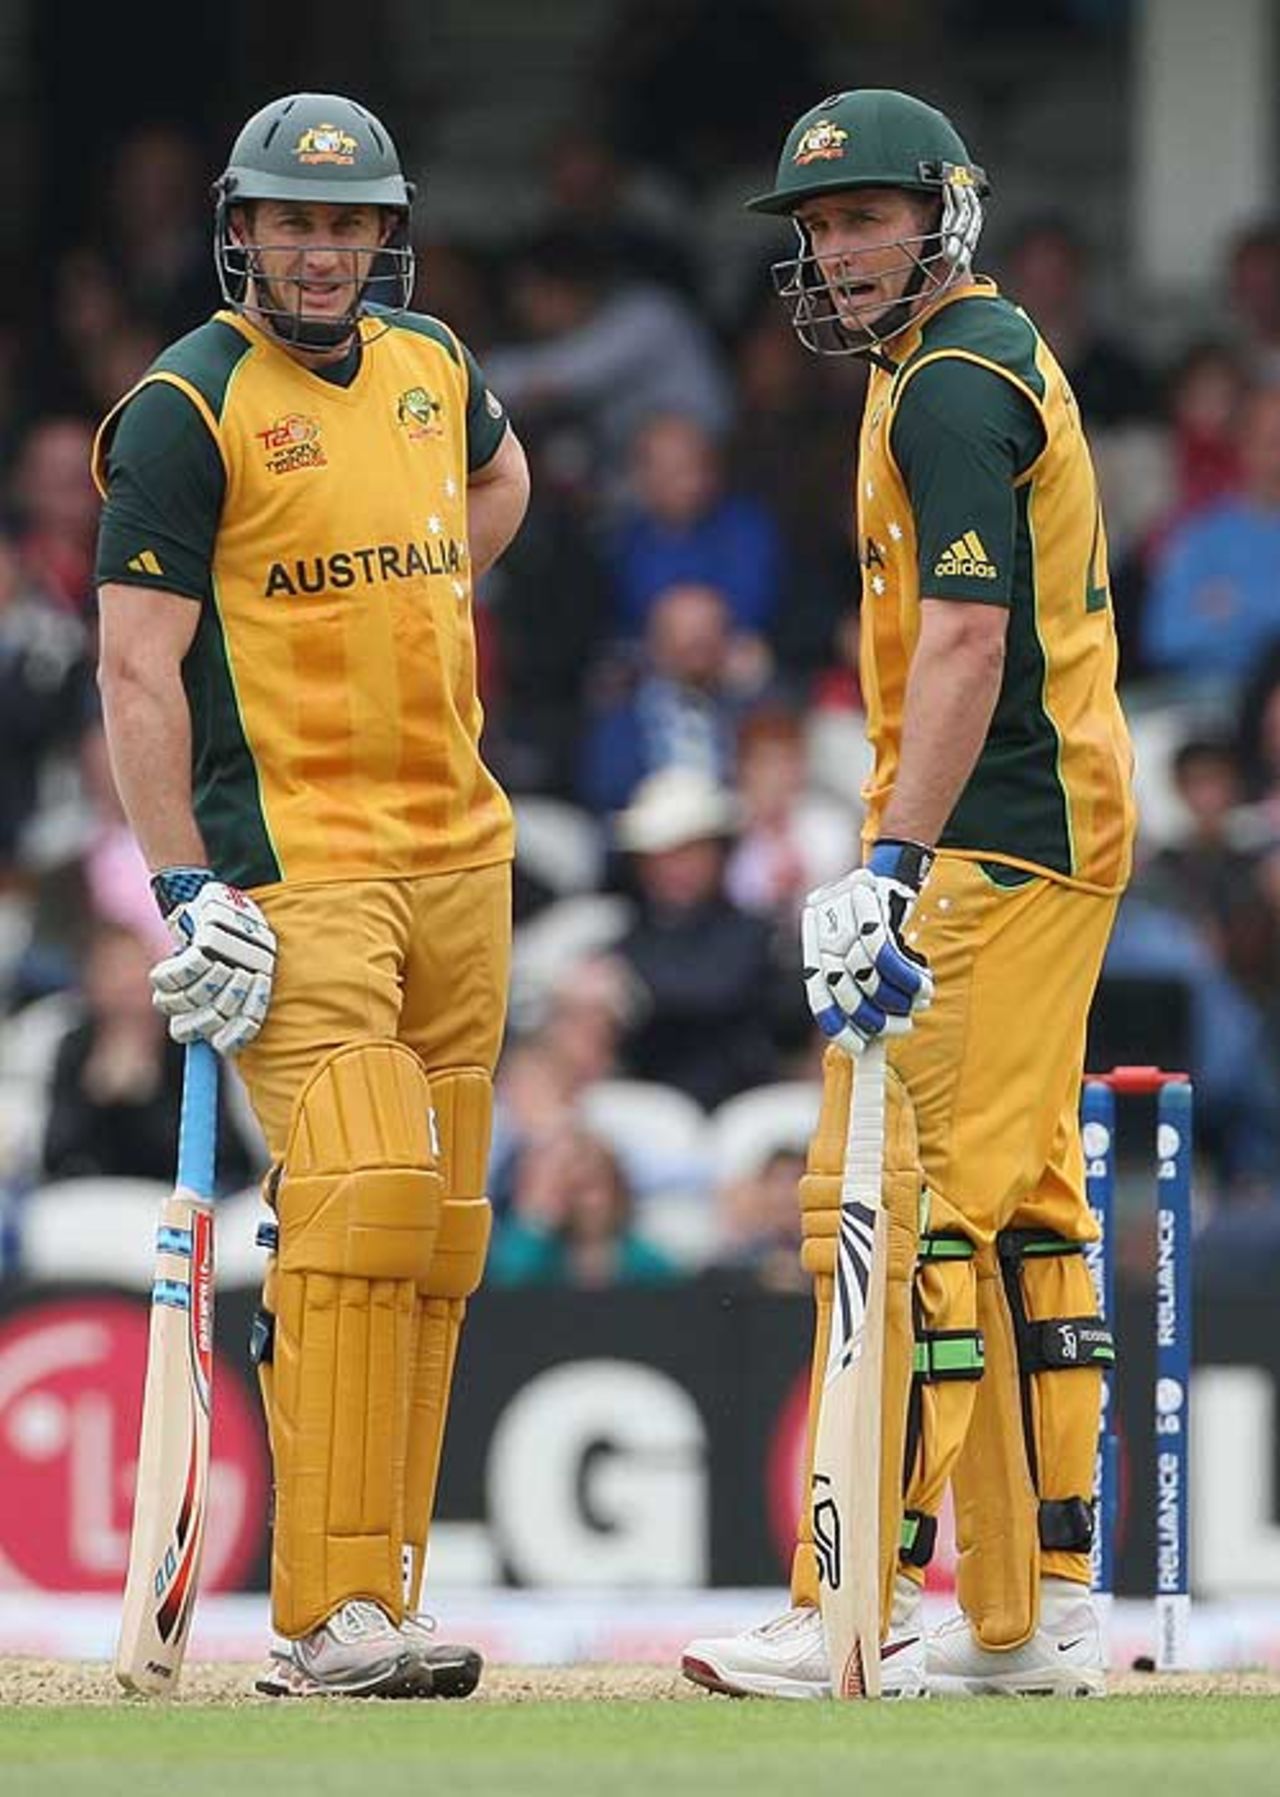 David and Michael Hussey added 30 for the sixth wicket, Australia v West Indies, ICC World Twenty20, The Oval, June 6, 2009